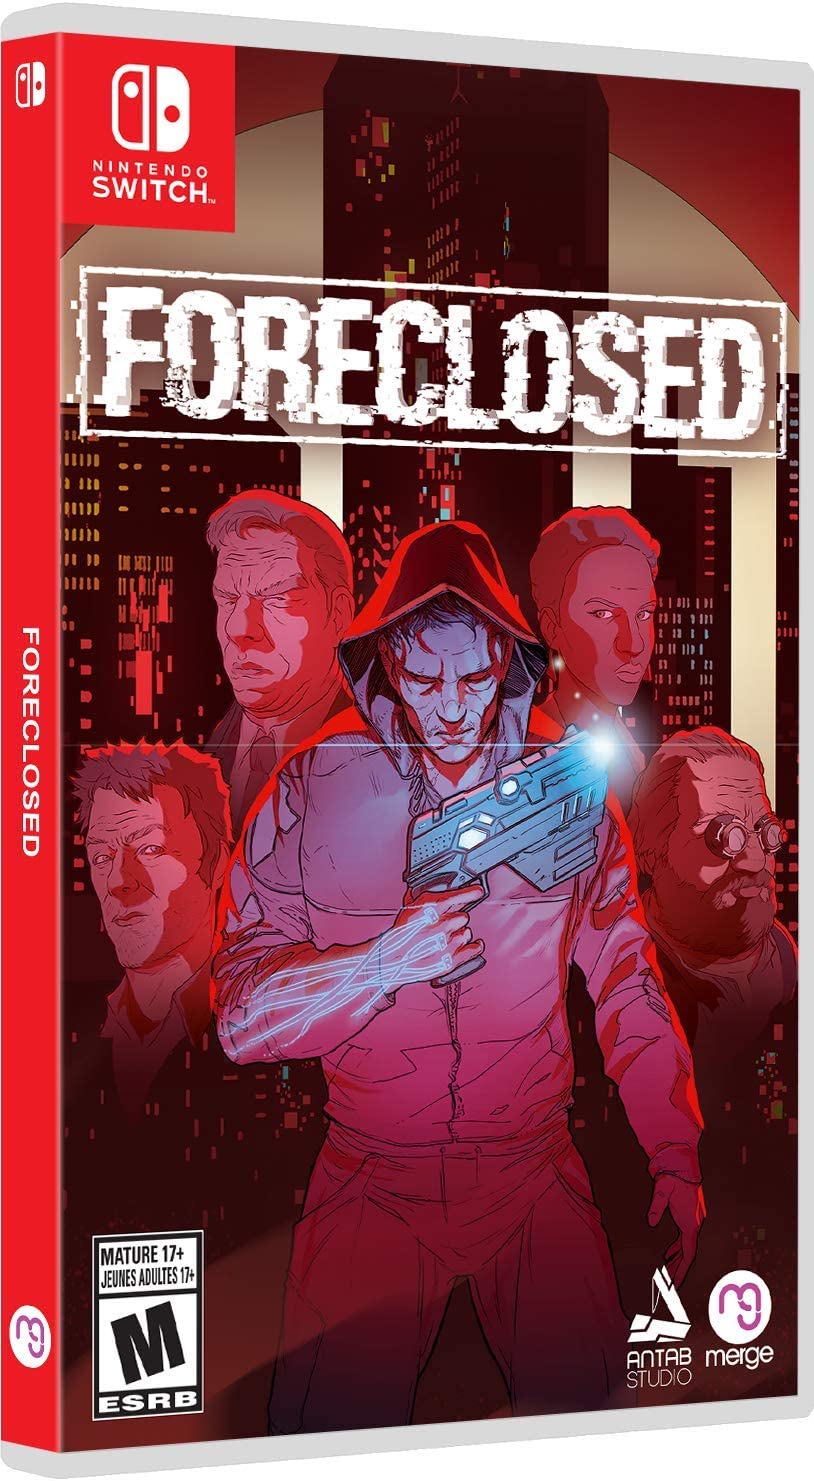 Foreclosed (Xbox One / Series X)